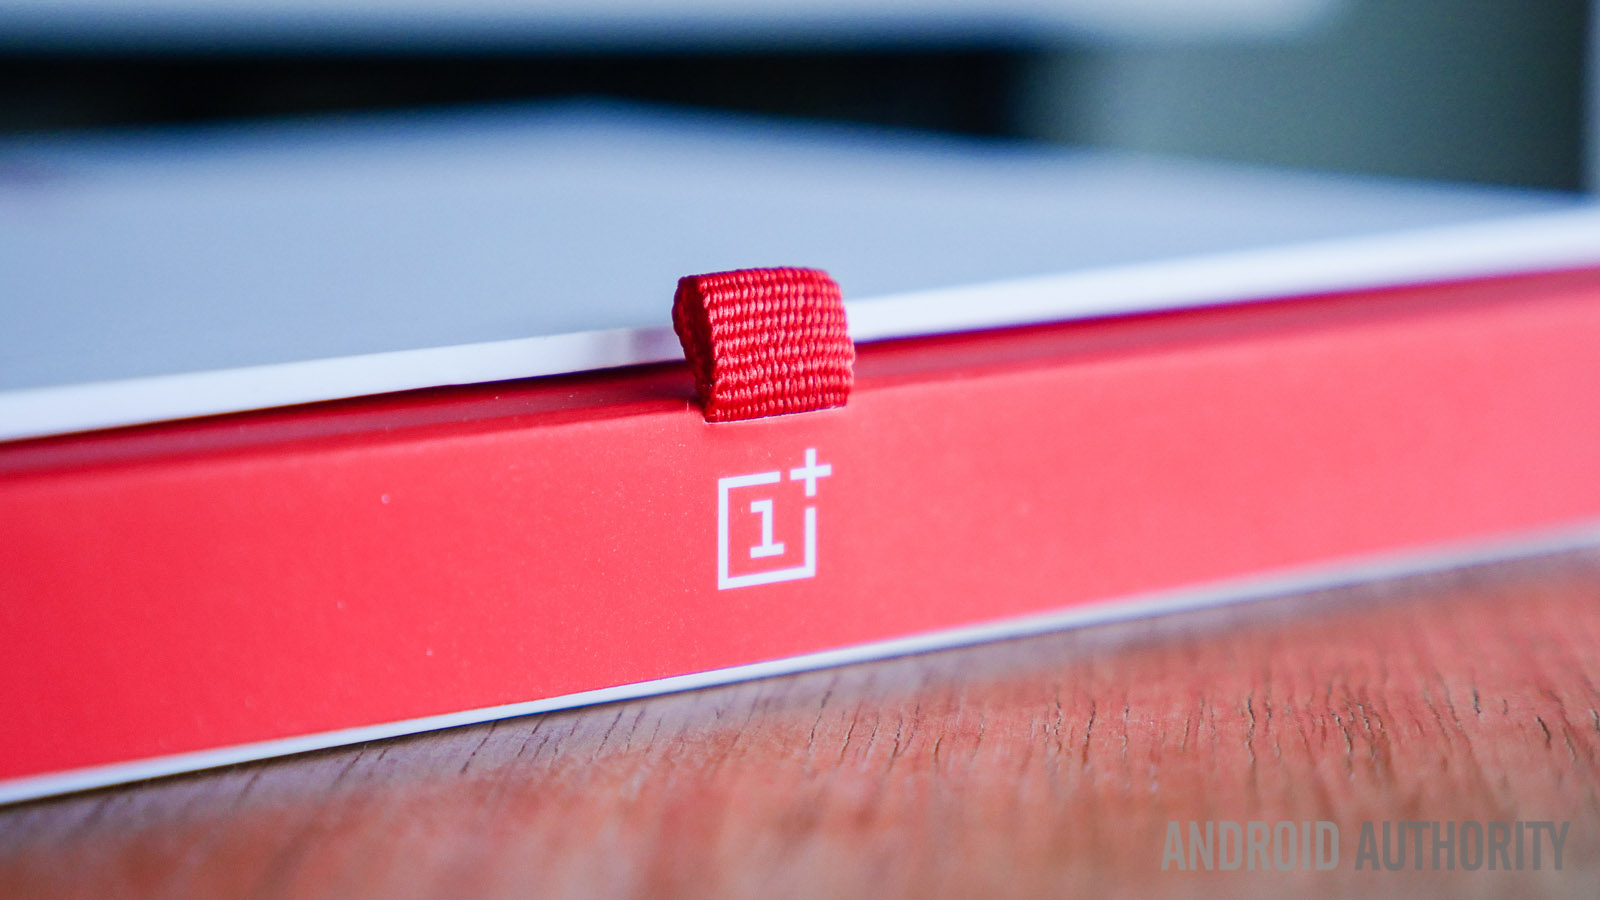 oneplus one unboxing (8 of 29)